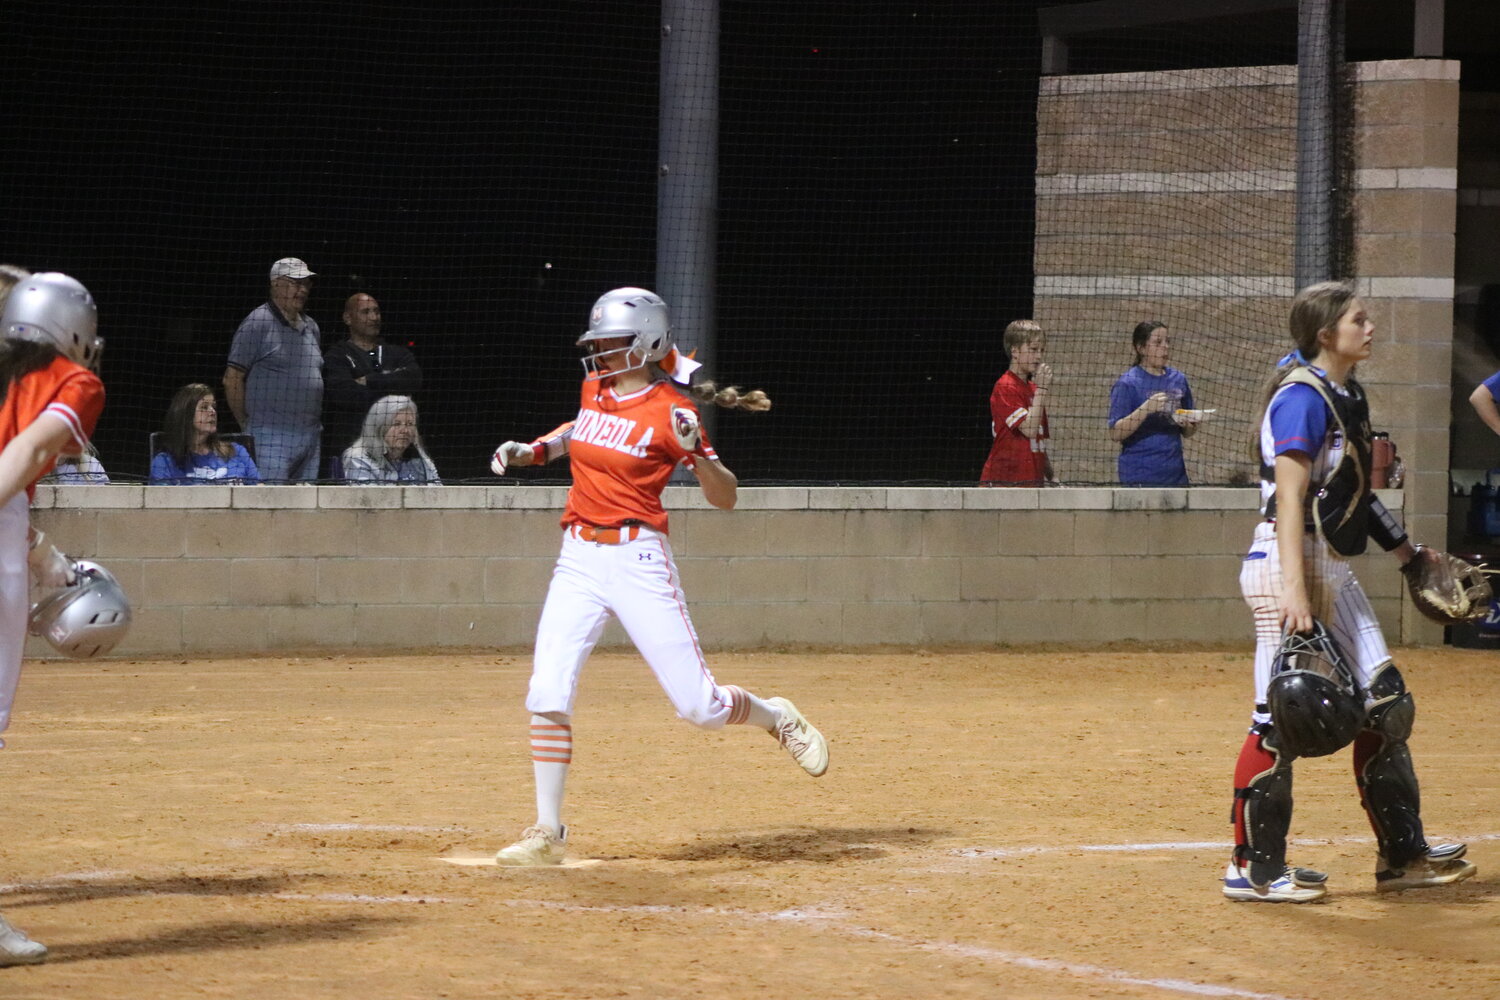 Quitman catcher Larkin Spears waits for a throw as Mineola scores another run in last week’s 11-1 district victory by the Lady Jackets.